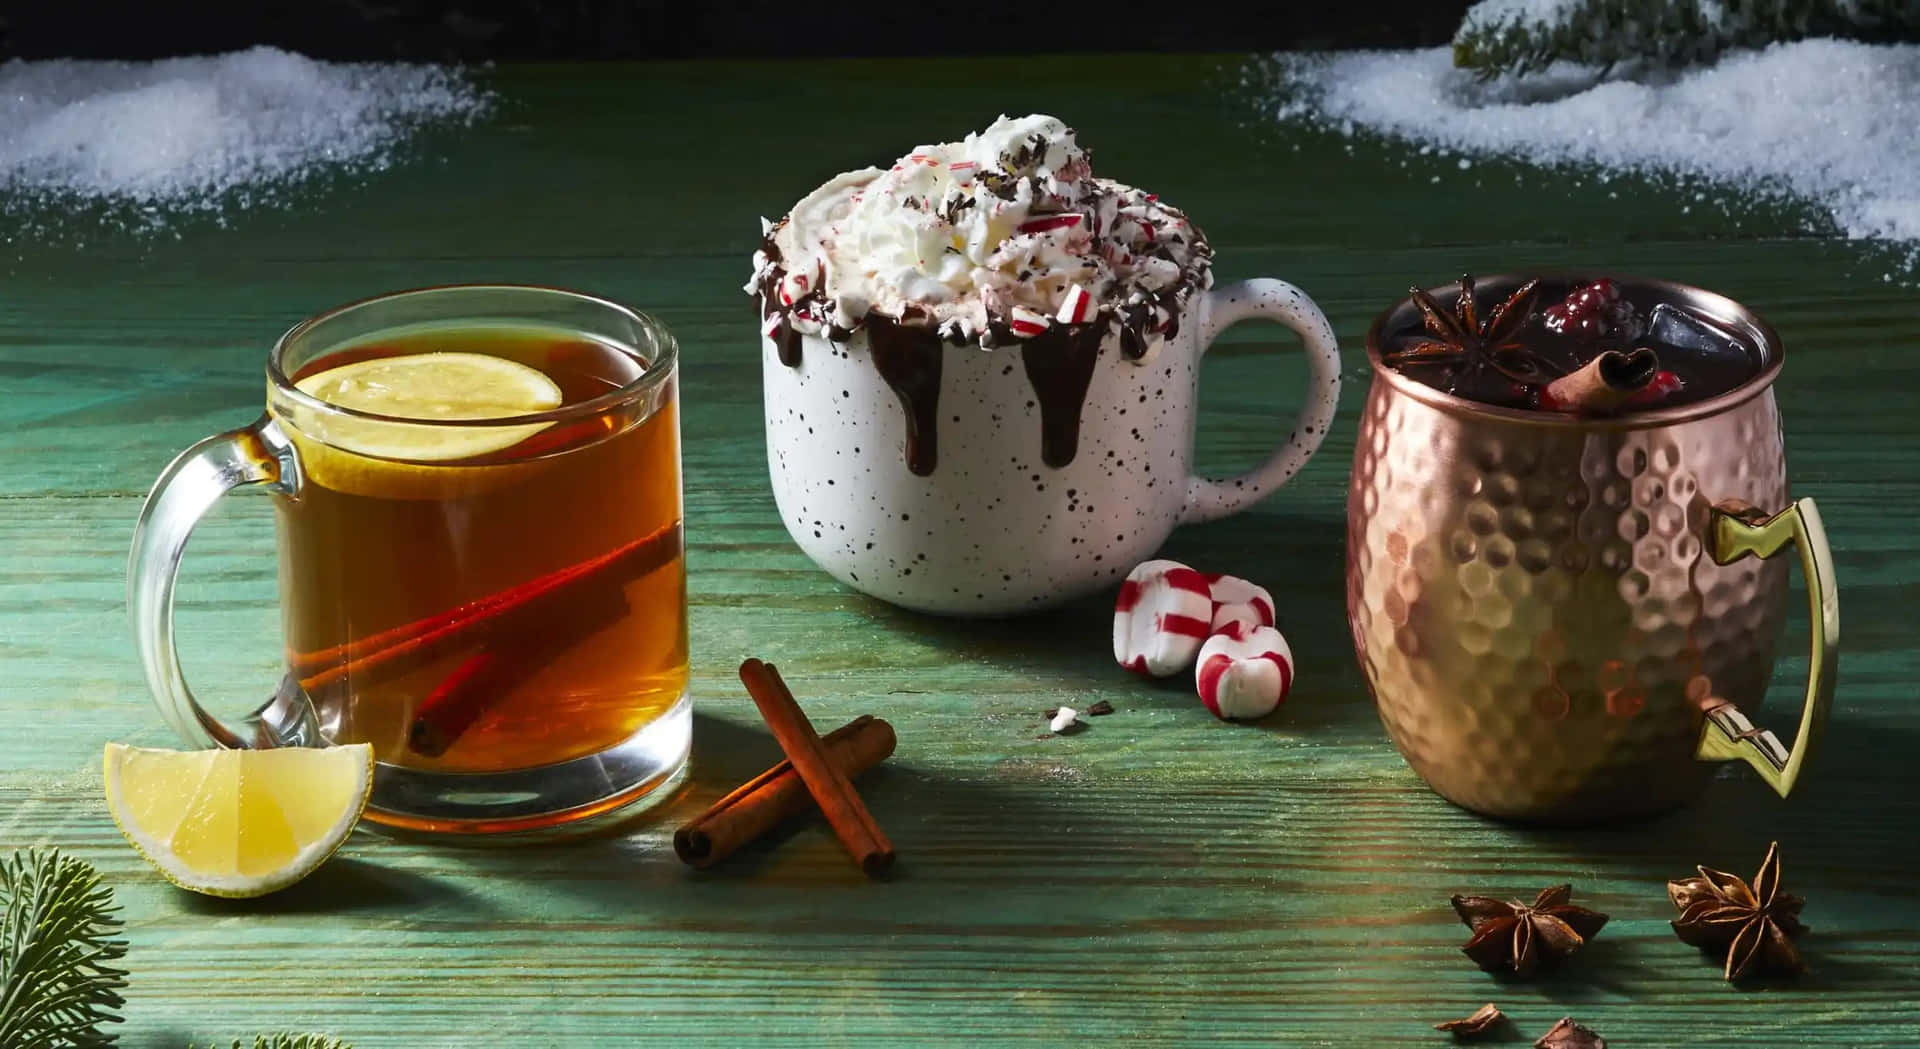 A cozy winter scene with a steaming cup of hot chocolate and cinnamon sticks Wallpaper